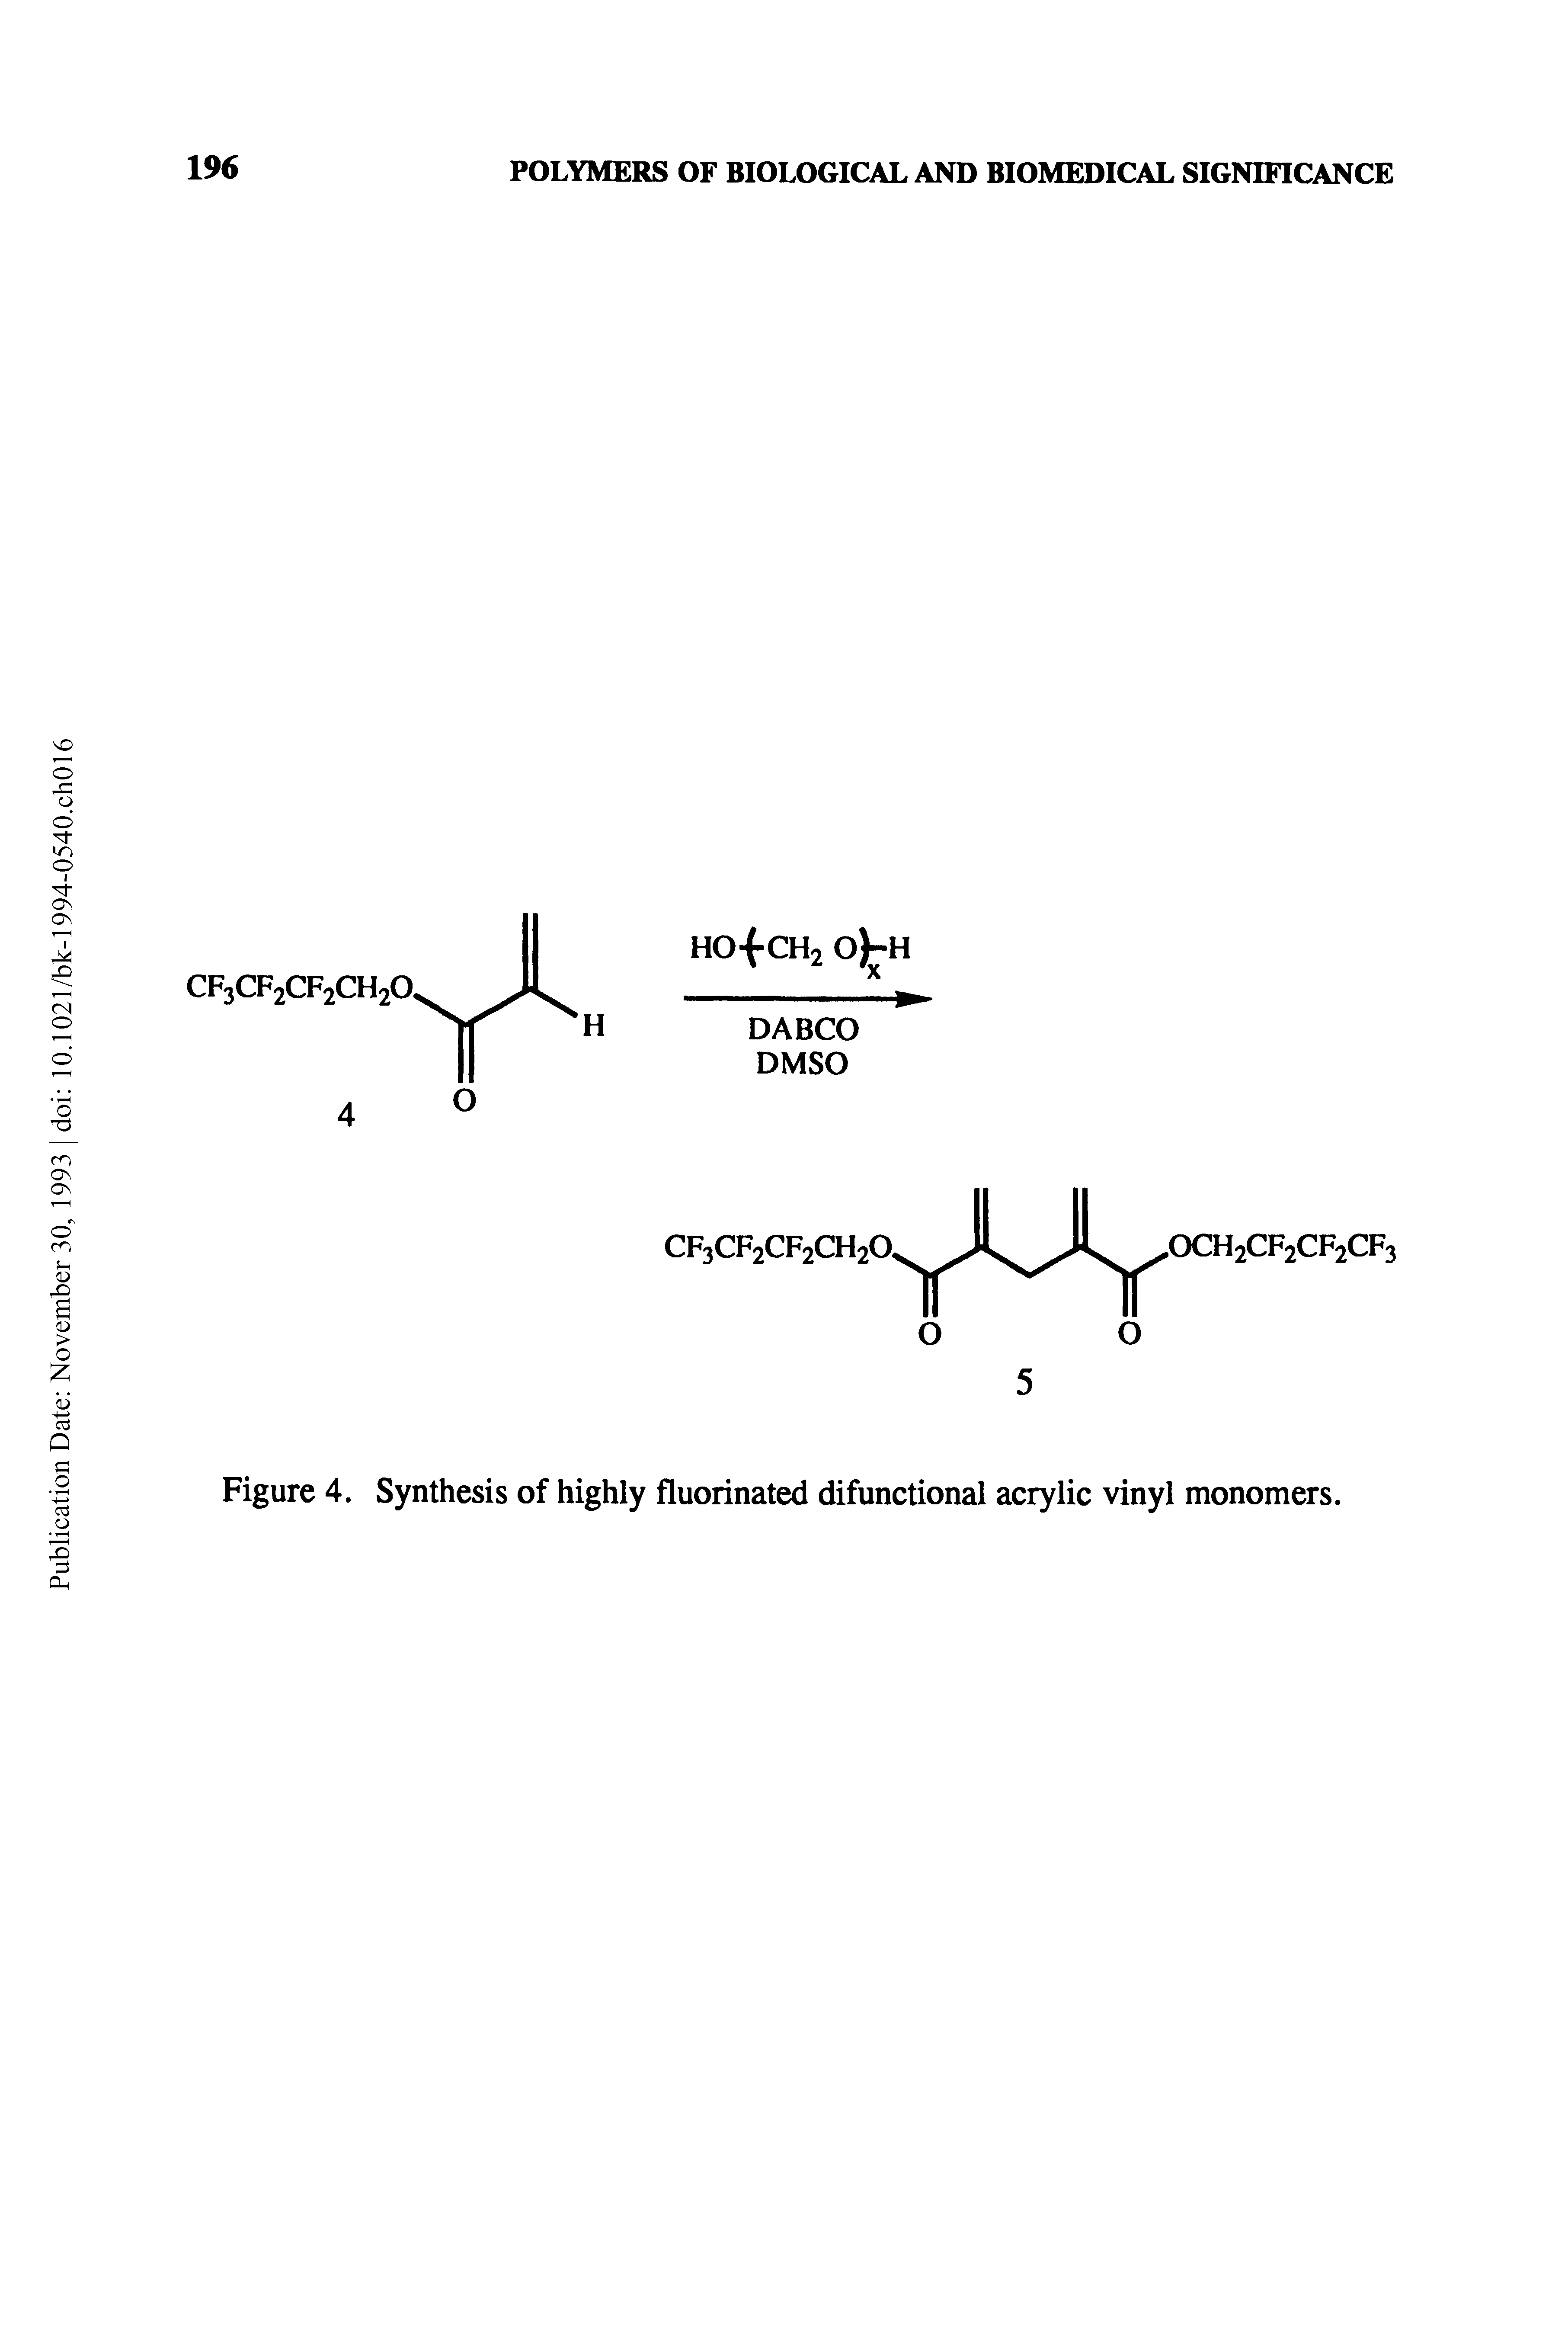 Figure 4. Synthesis of highly fluorinated difunctional acrylic vinyl monomers.